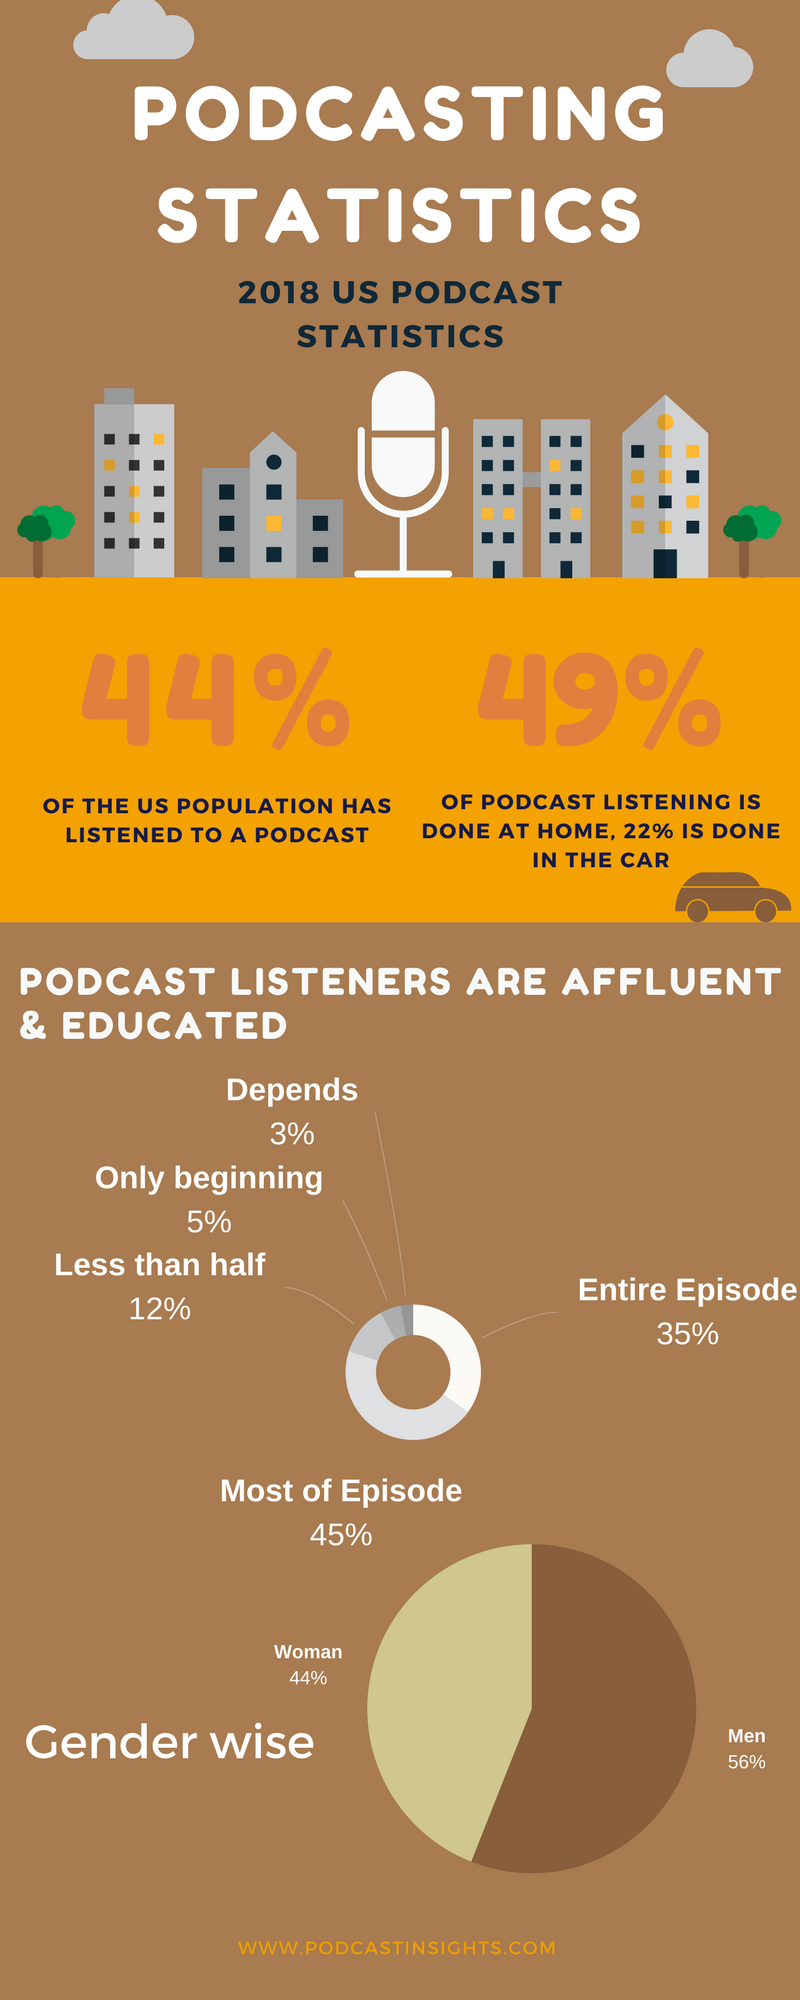 All about Drupal and Podcasts OpenSense Labs